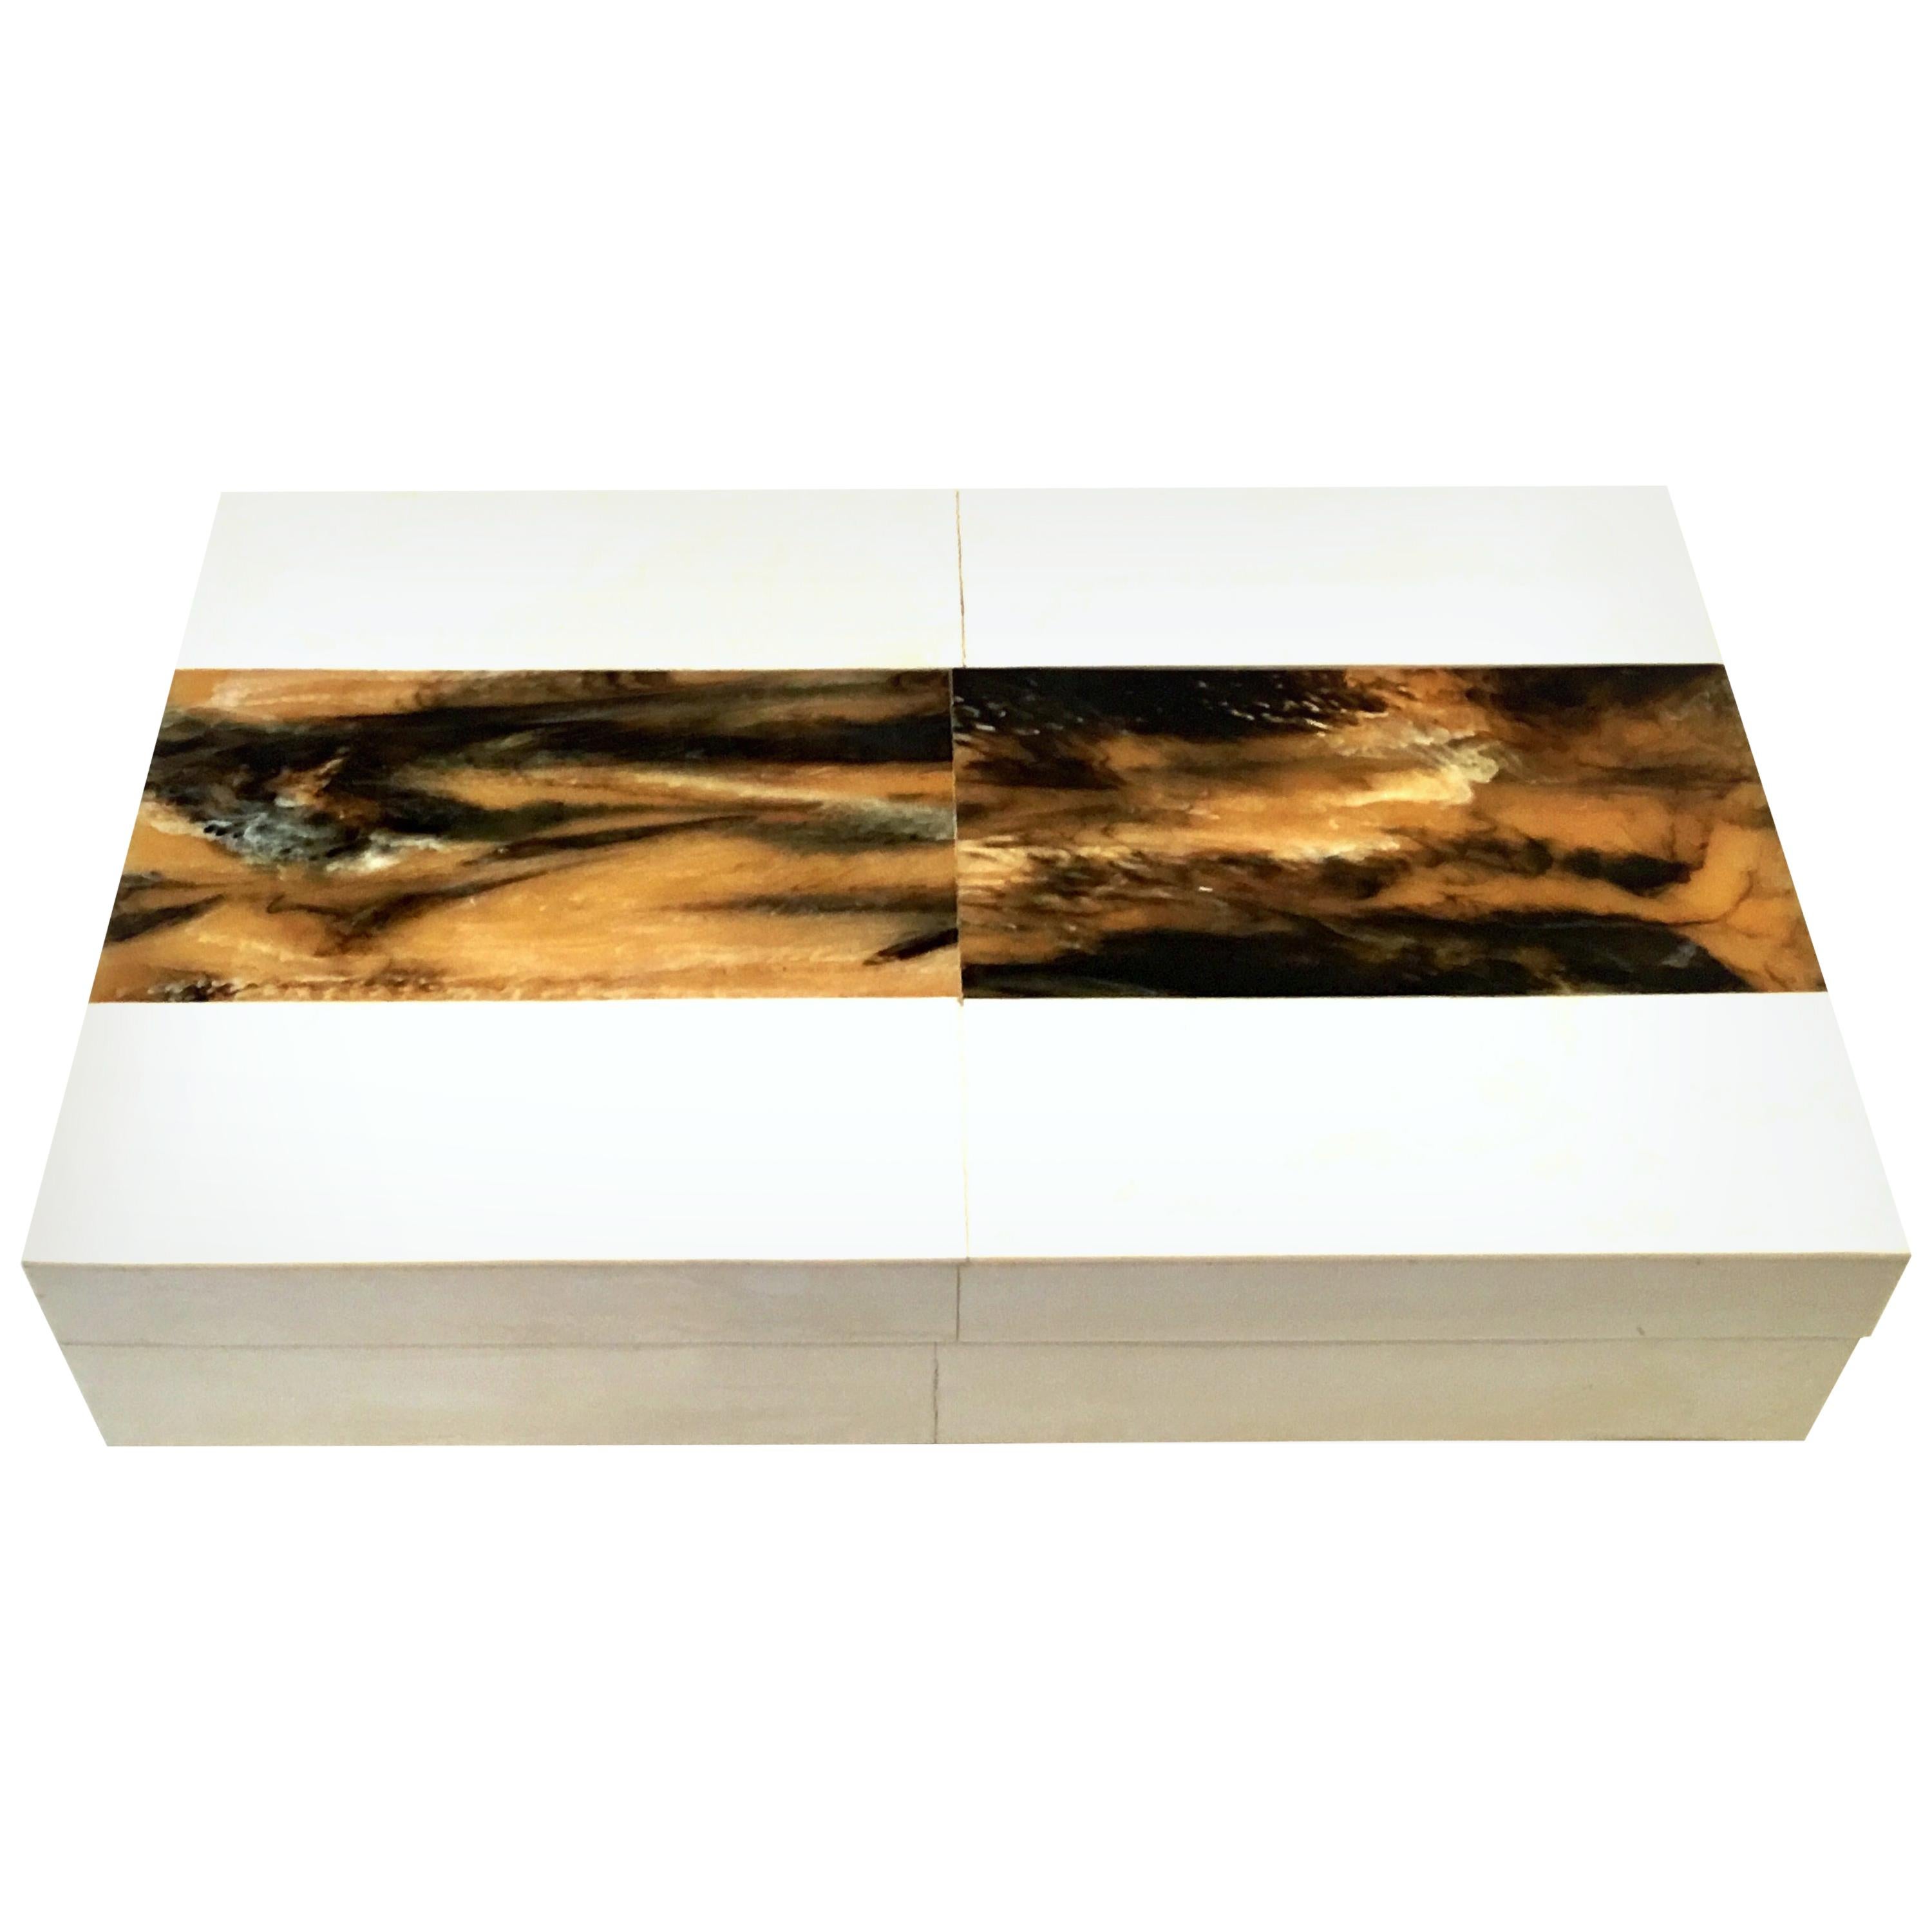 21st Century Maple and Madagascar Rosewood Inlay Large Lidded "Letter" Box For Sale